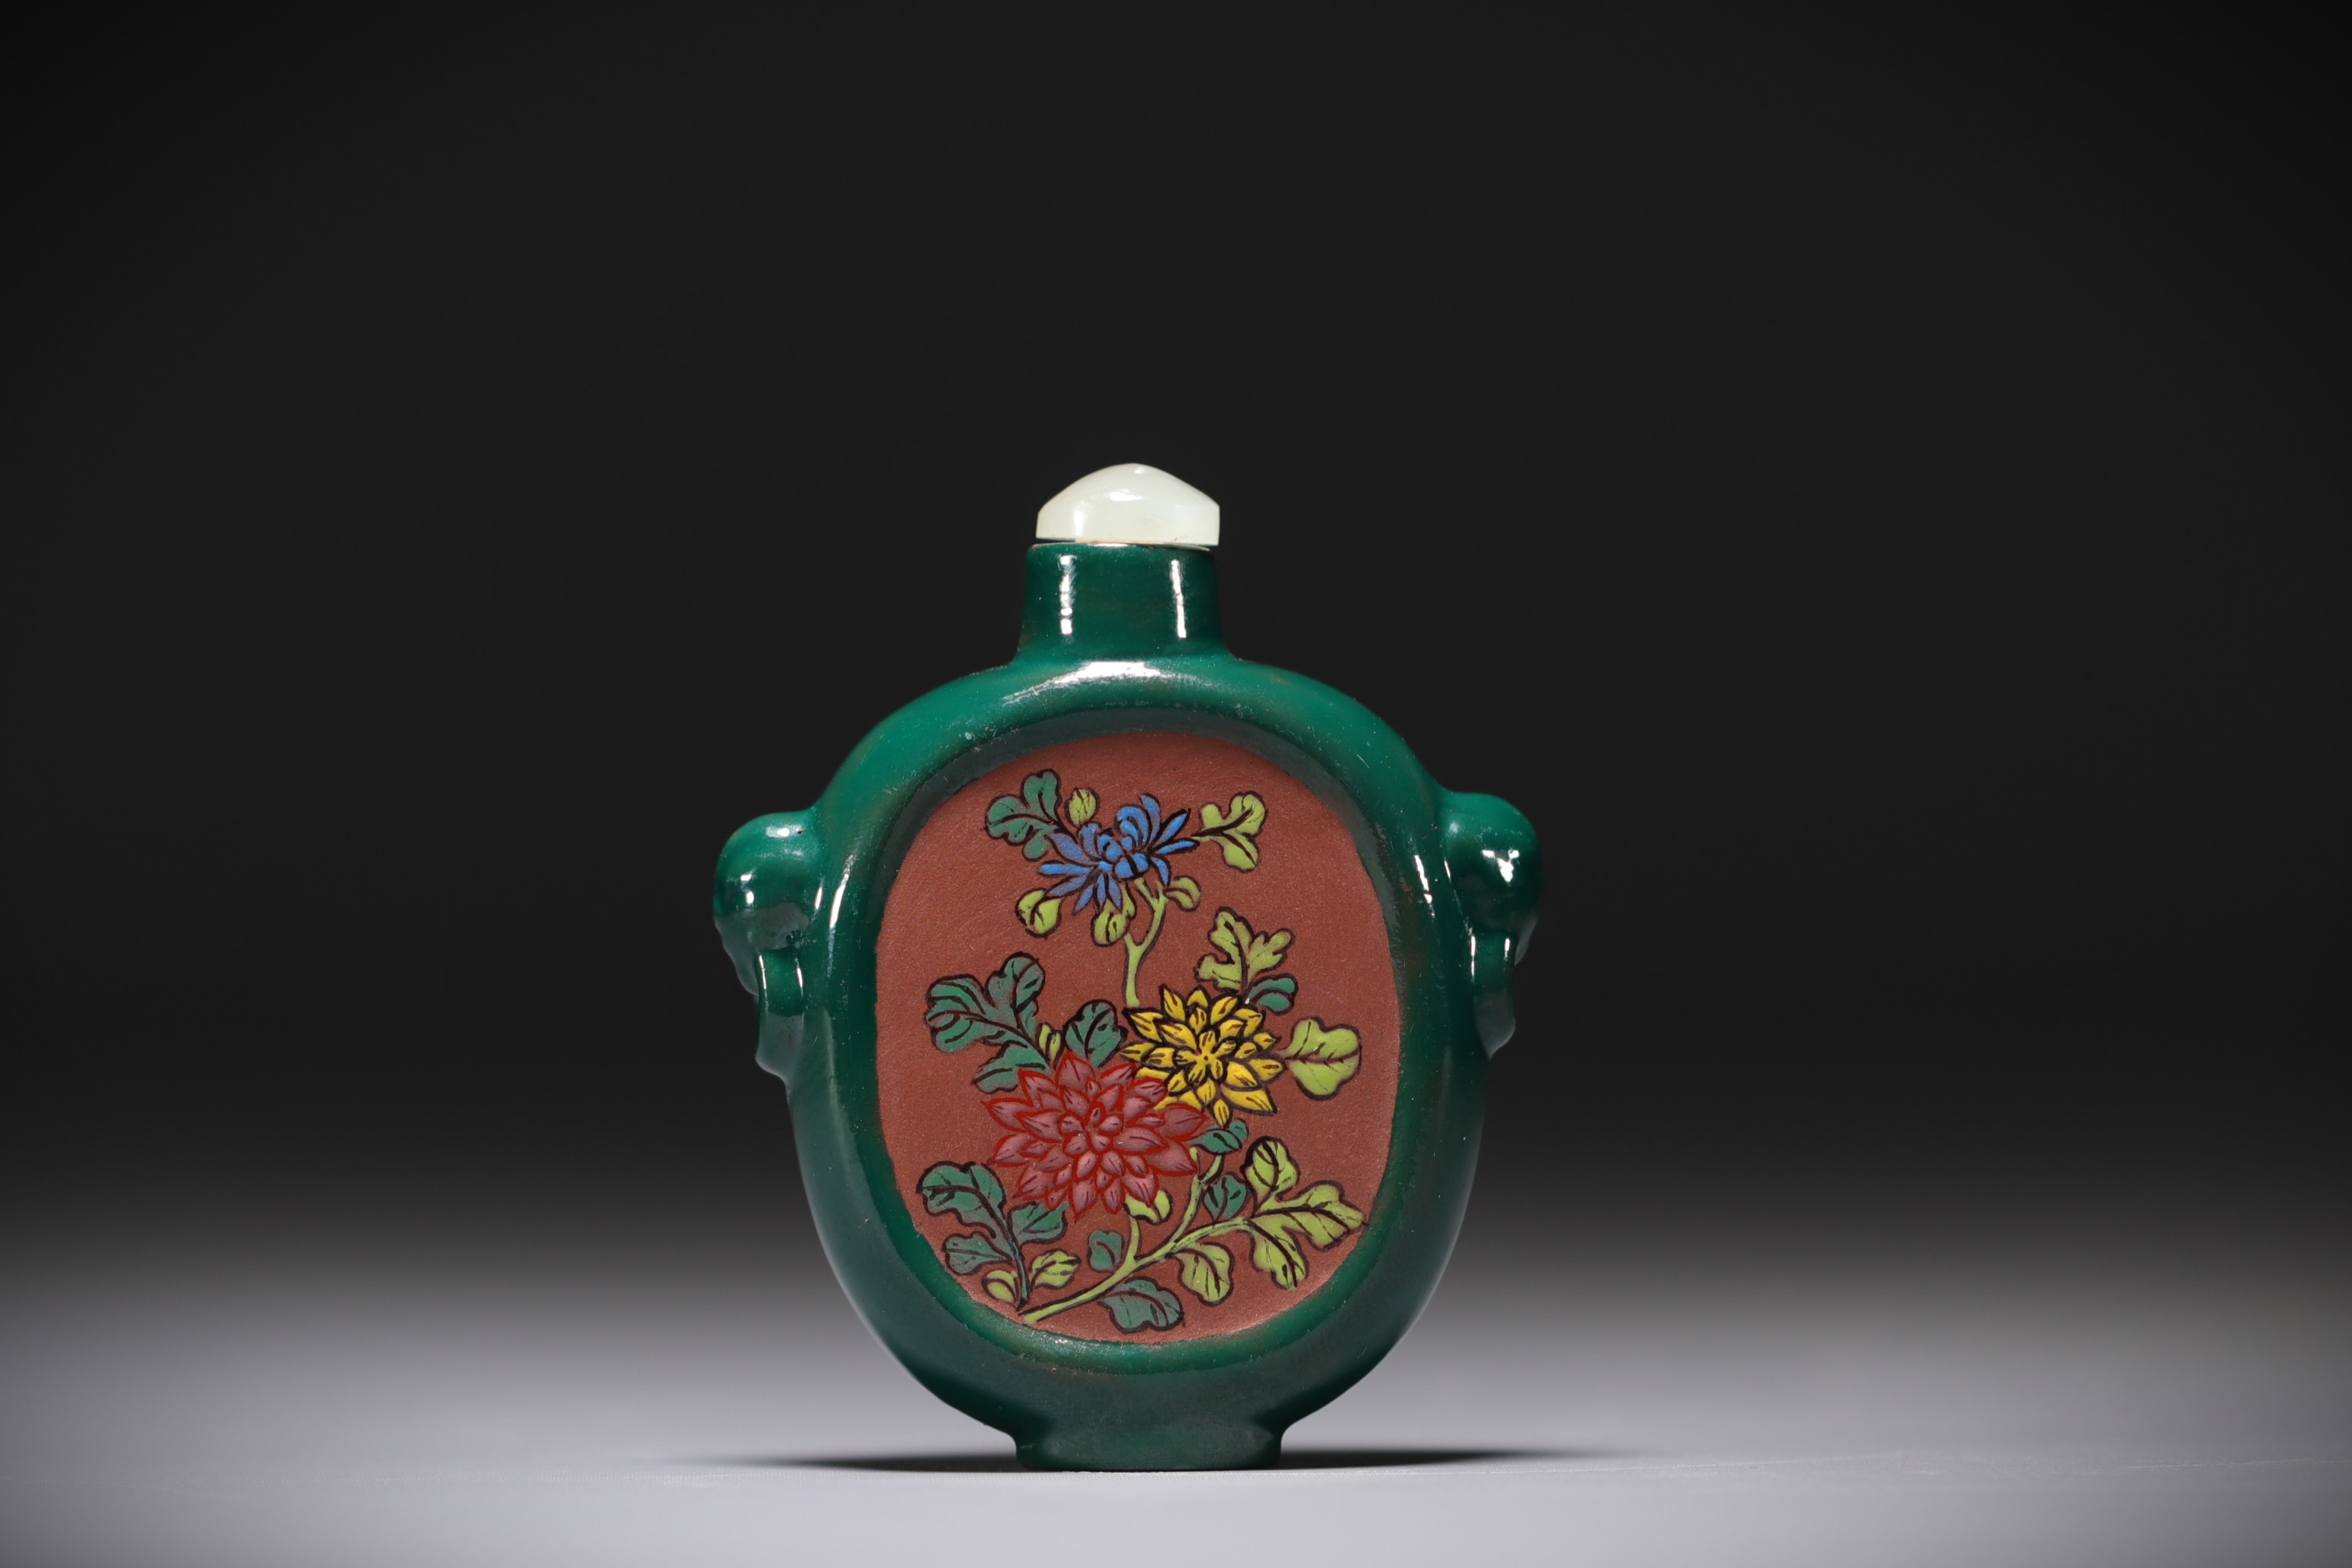 China - Ceramic snuffbox with floral decoration, circa 1900. - Image 3 of 4